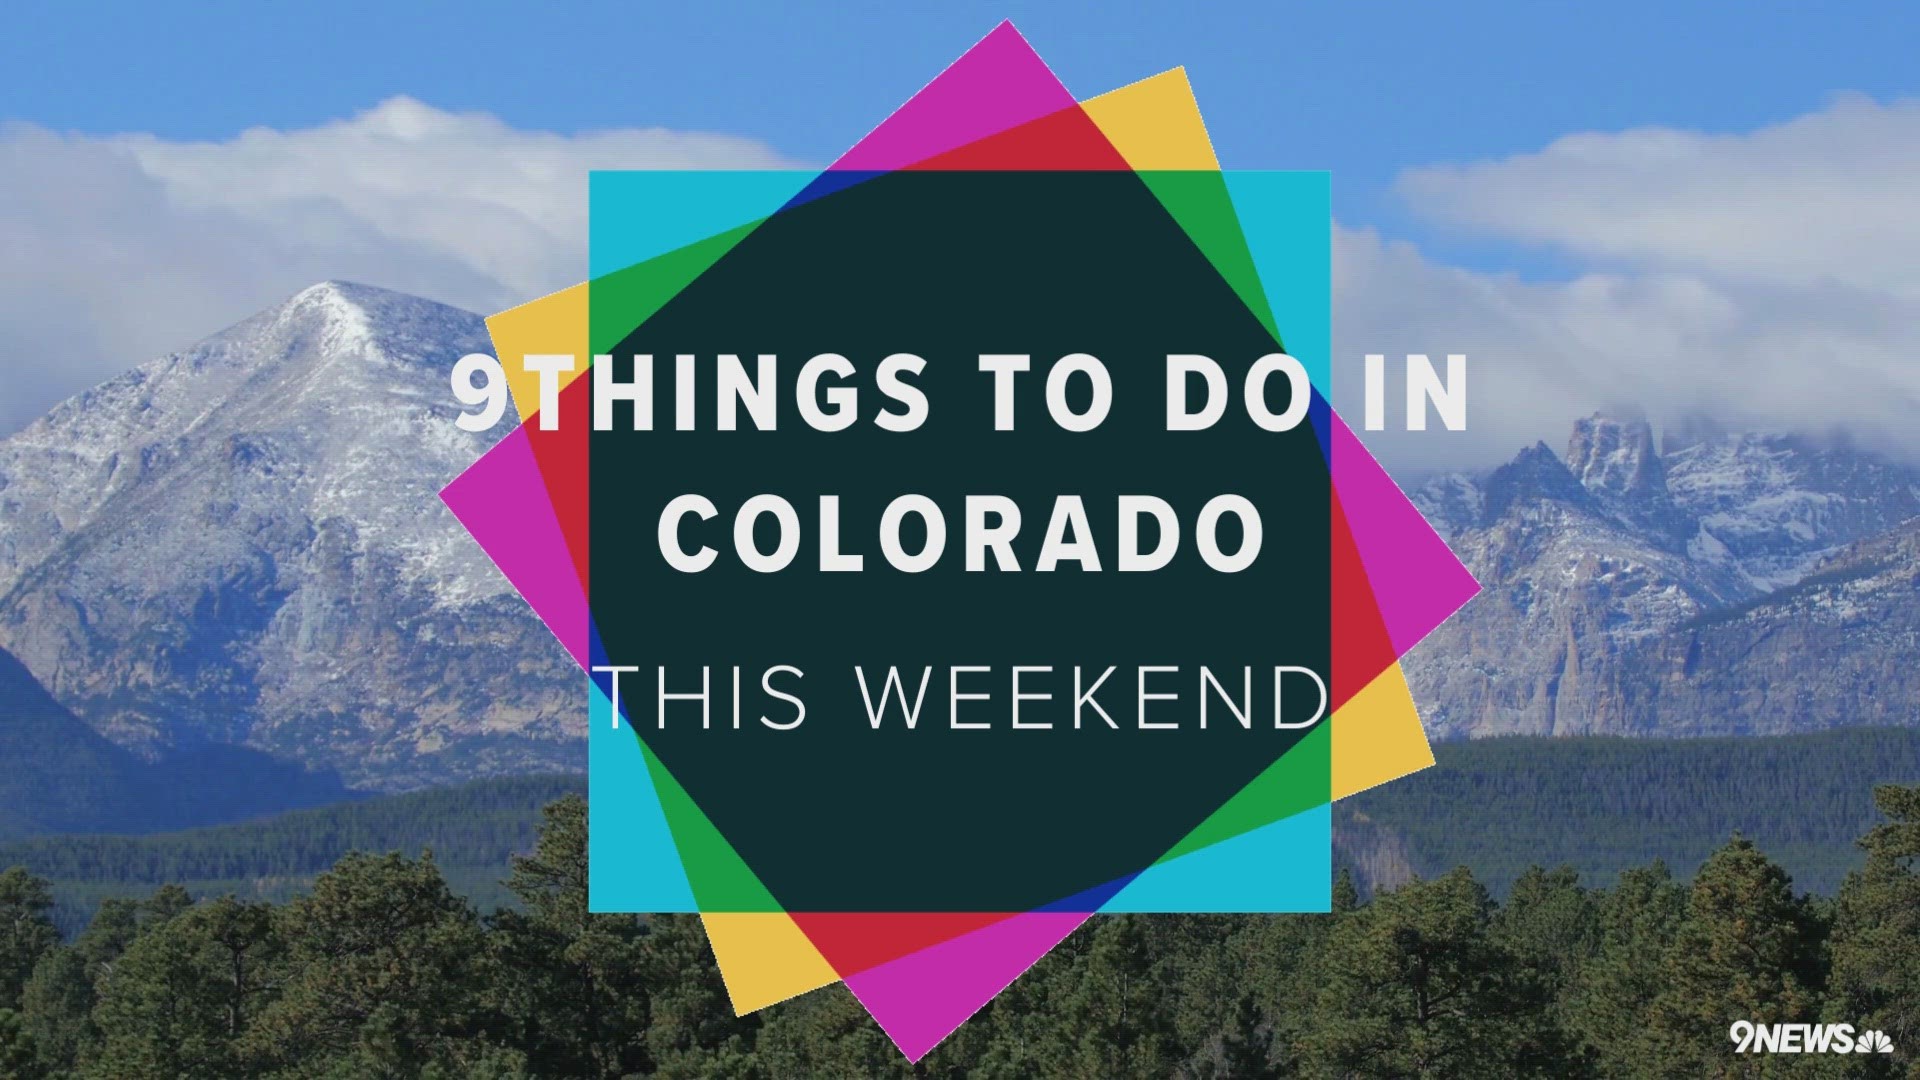 The first weekend of August will be full of fun events in Colorado.